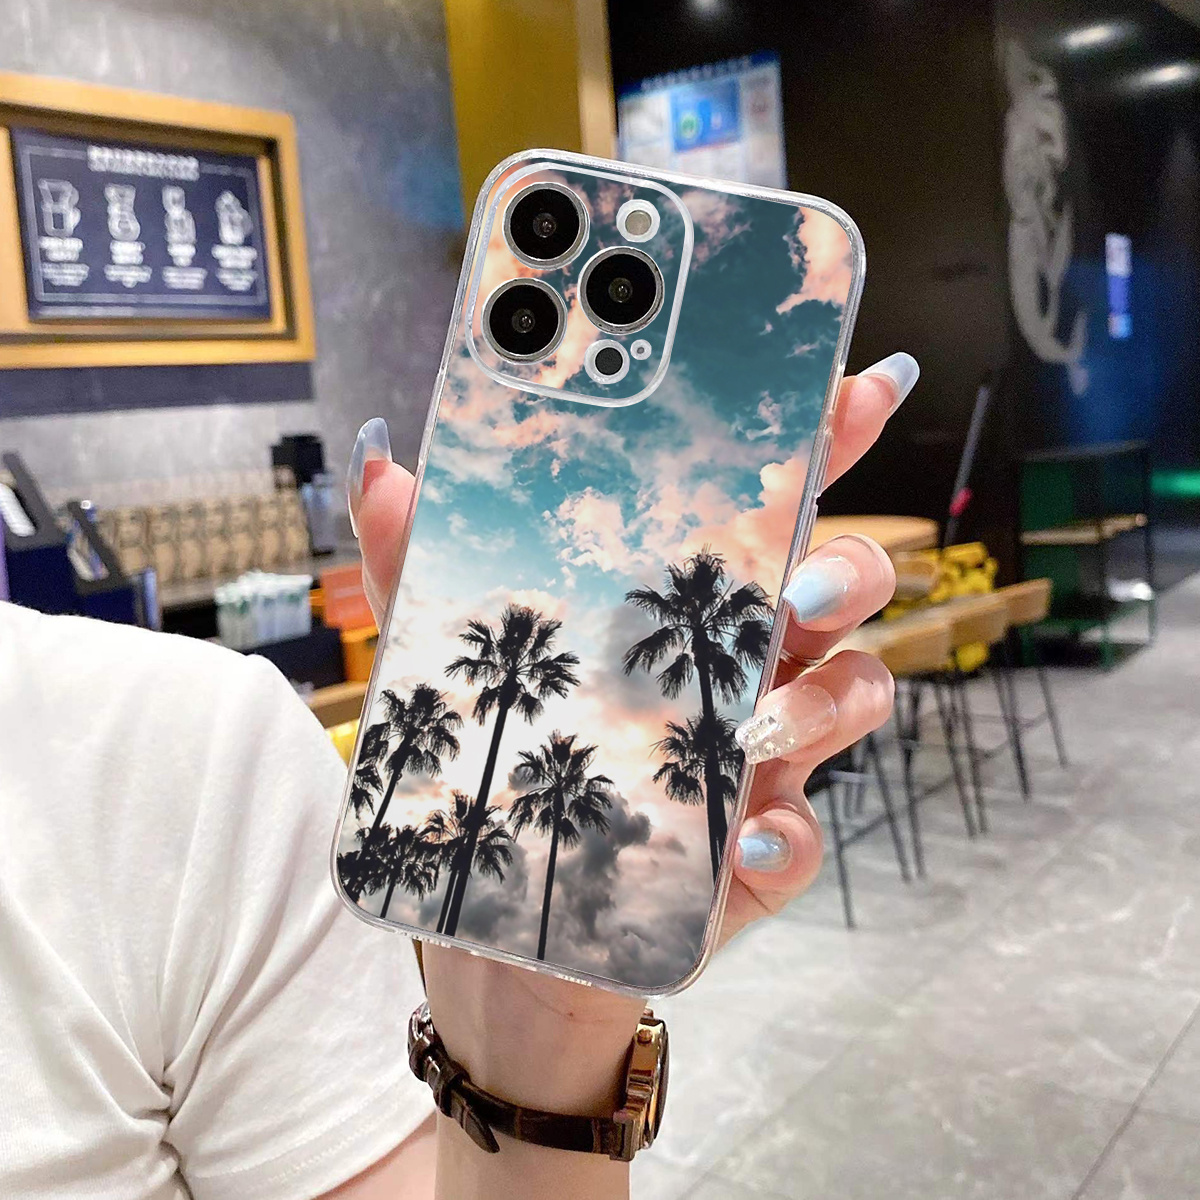 

Blue Sky Coconut Tree Pattern Design Shockproof Slim Protective Cove Sleeve Phone Case Camera Lens All Inclusive Phone Soft Shell For Iphone7/8/11/ 12/13/14/15/x/xr/xs/plus/pro/pro Max/se